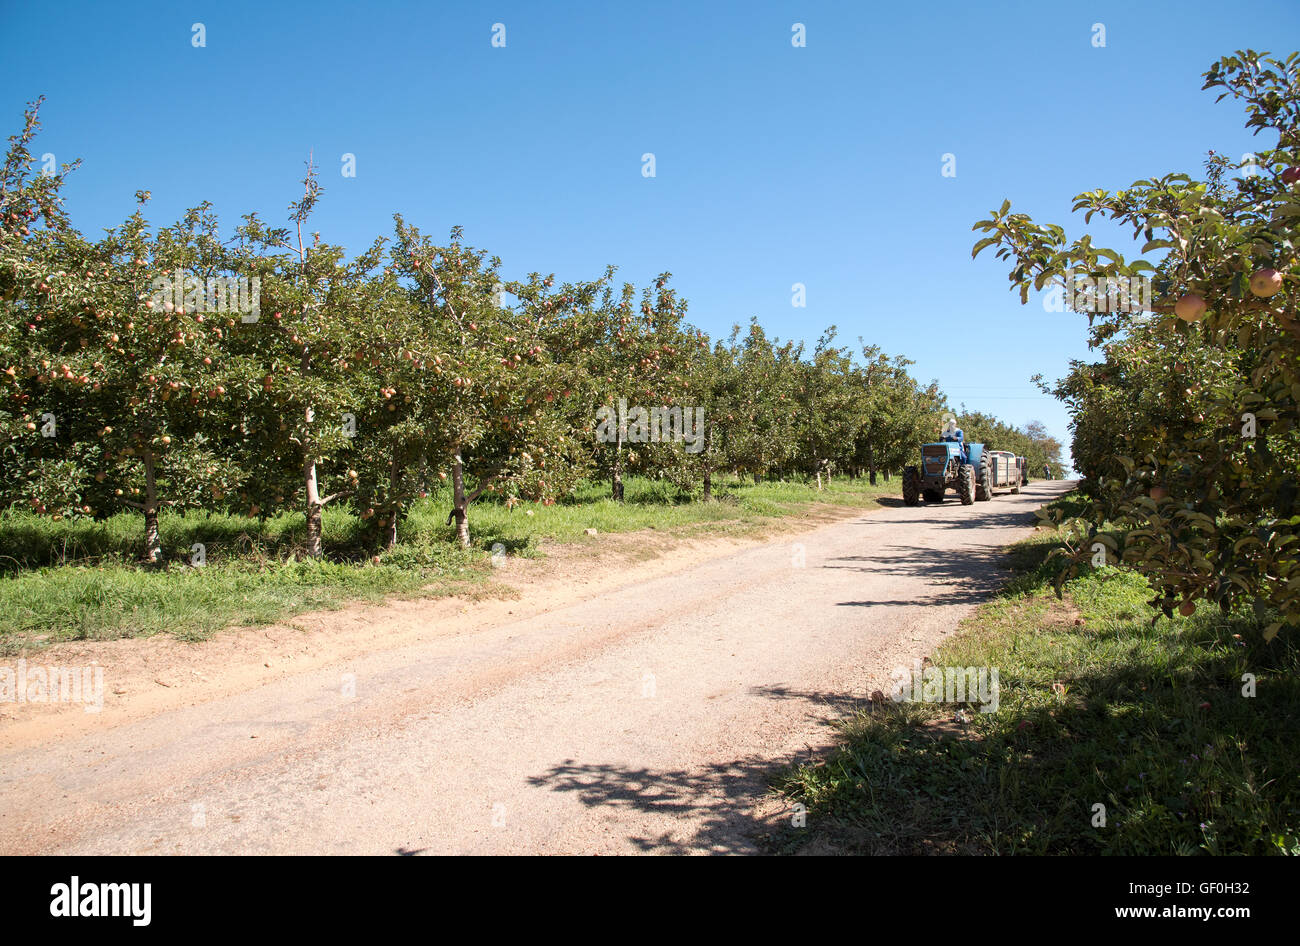 ELGIN WESTERN CAPE SOUTH AFRICA  Tractor driver on an apple farm at Elgin Southern Africa Stock Photo